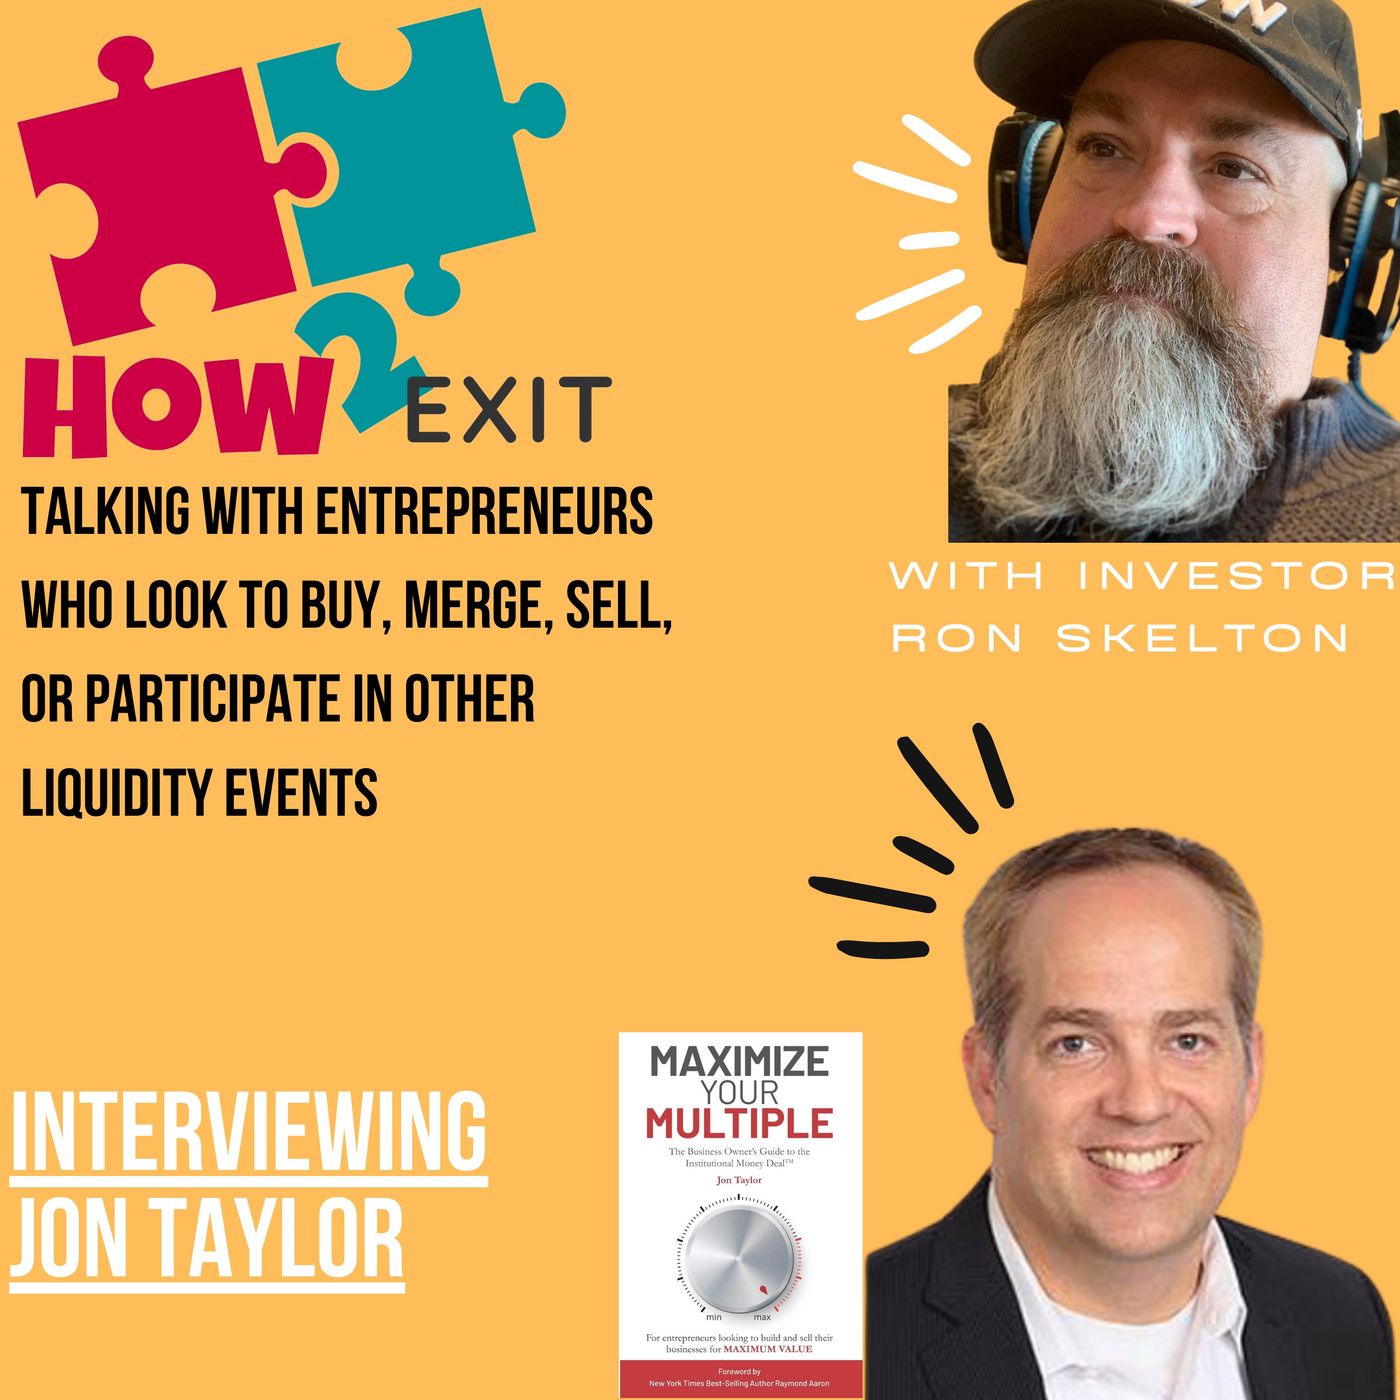 How2Exit Episode 37: Jon Taylor - over 20 years of M&A, advisory, and business valuation experience. Image